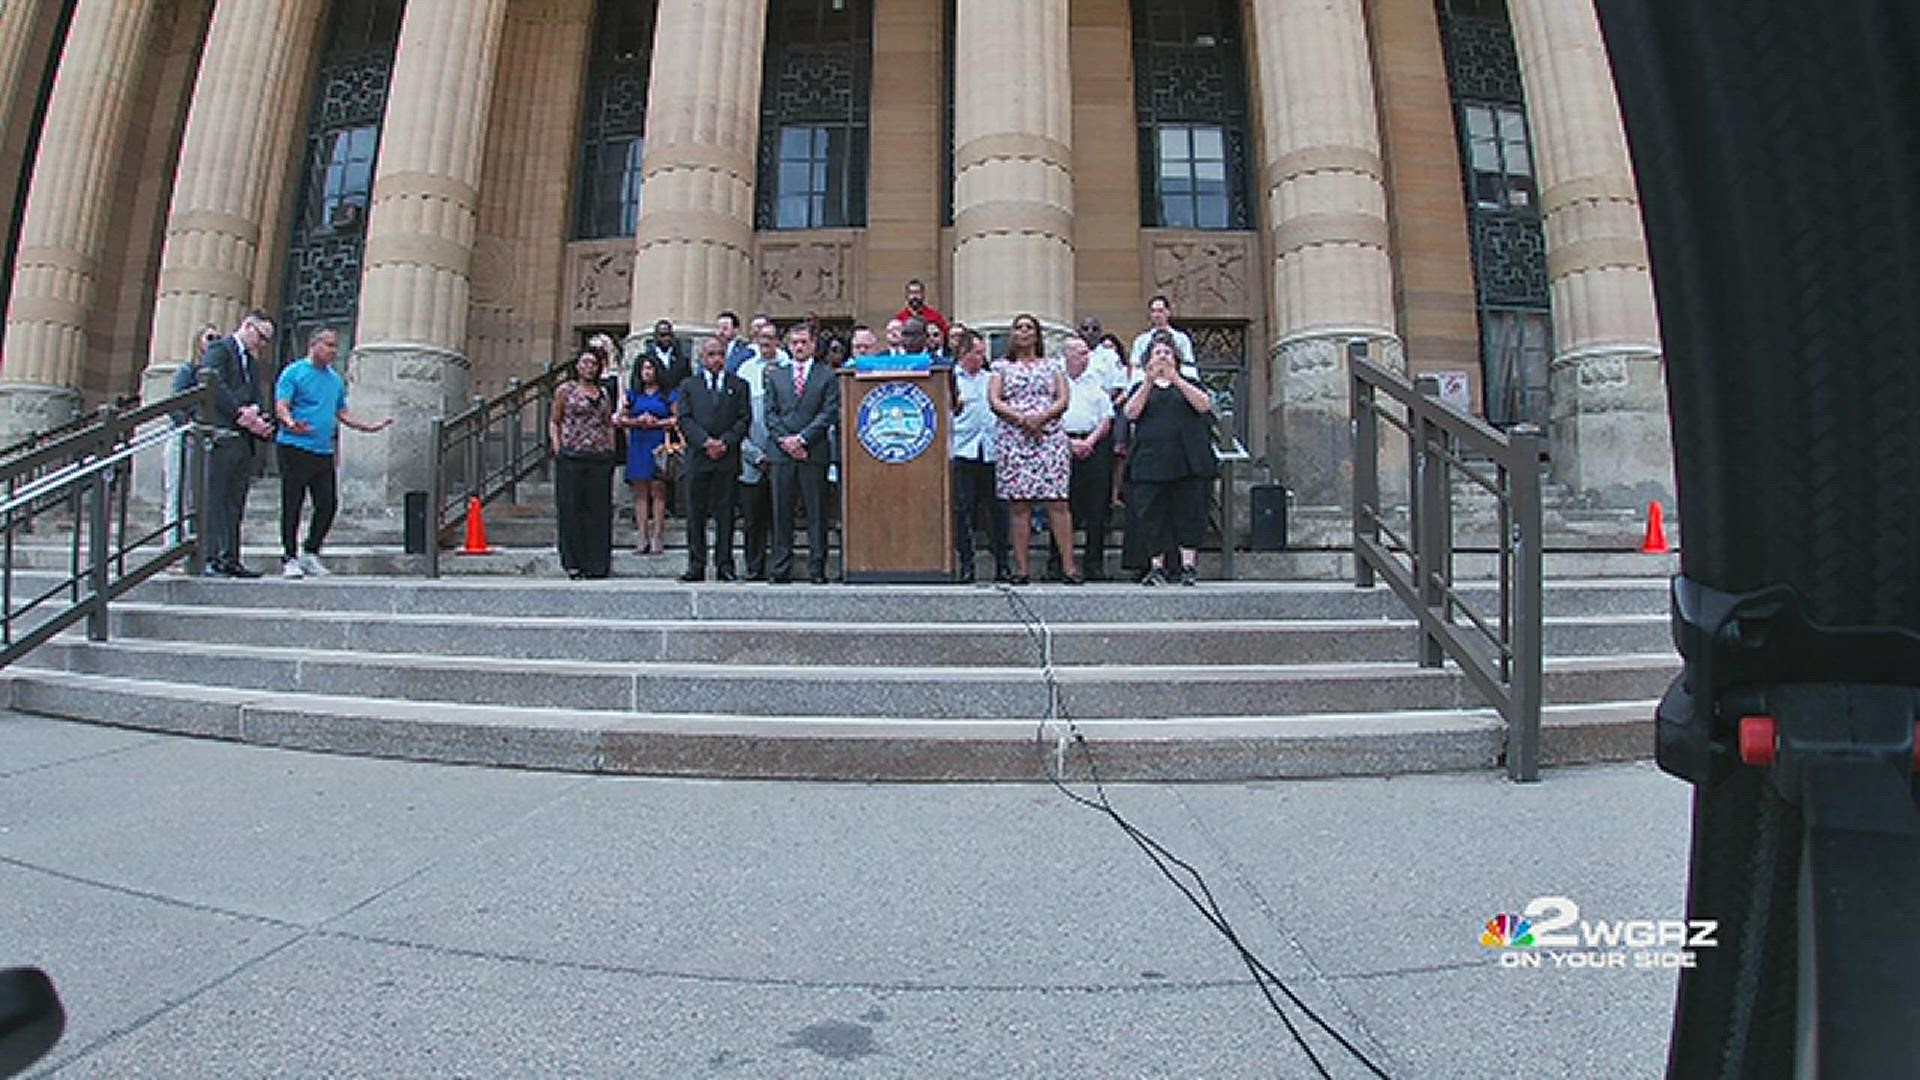 123 seconds: A moment of silence was held for the Tops shooting victims on Saturday, May 21 at the steps of Buffalo City Hall.